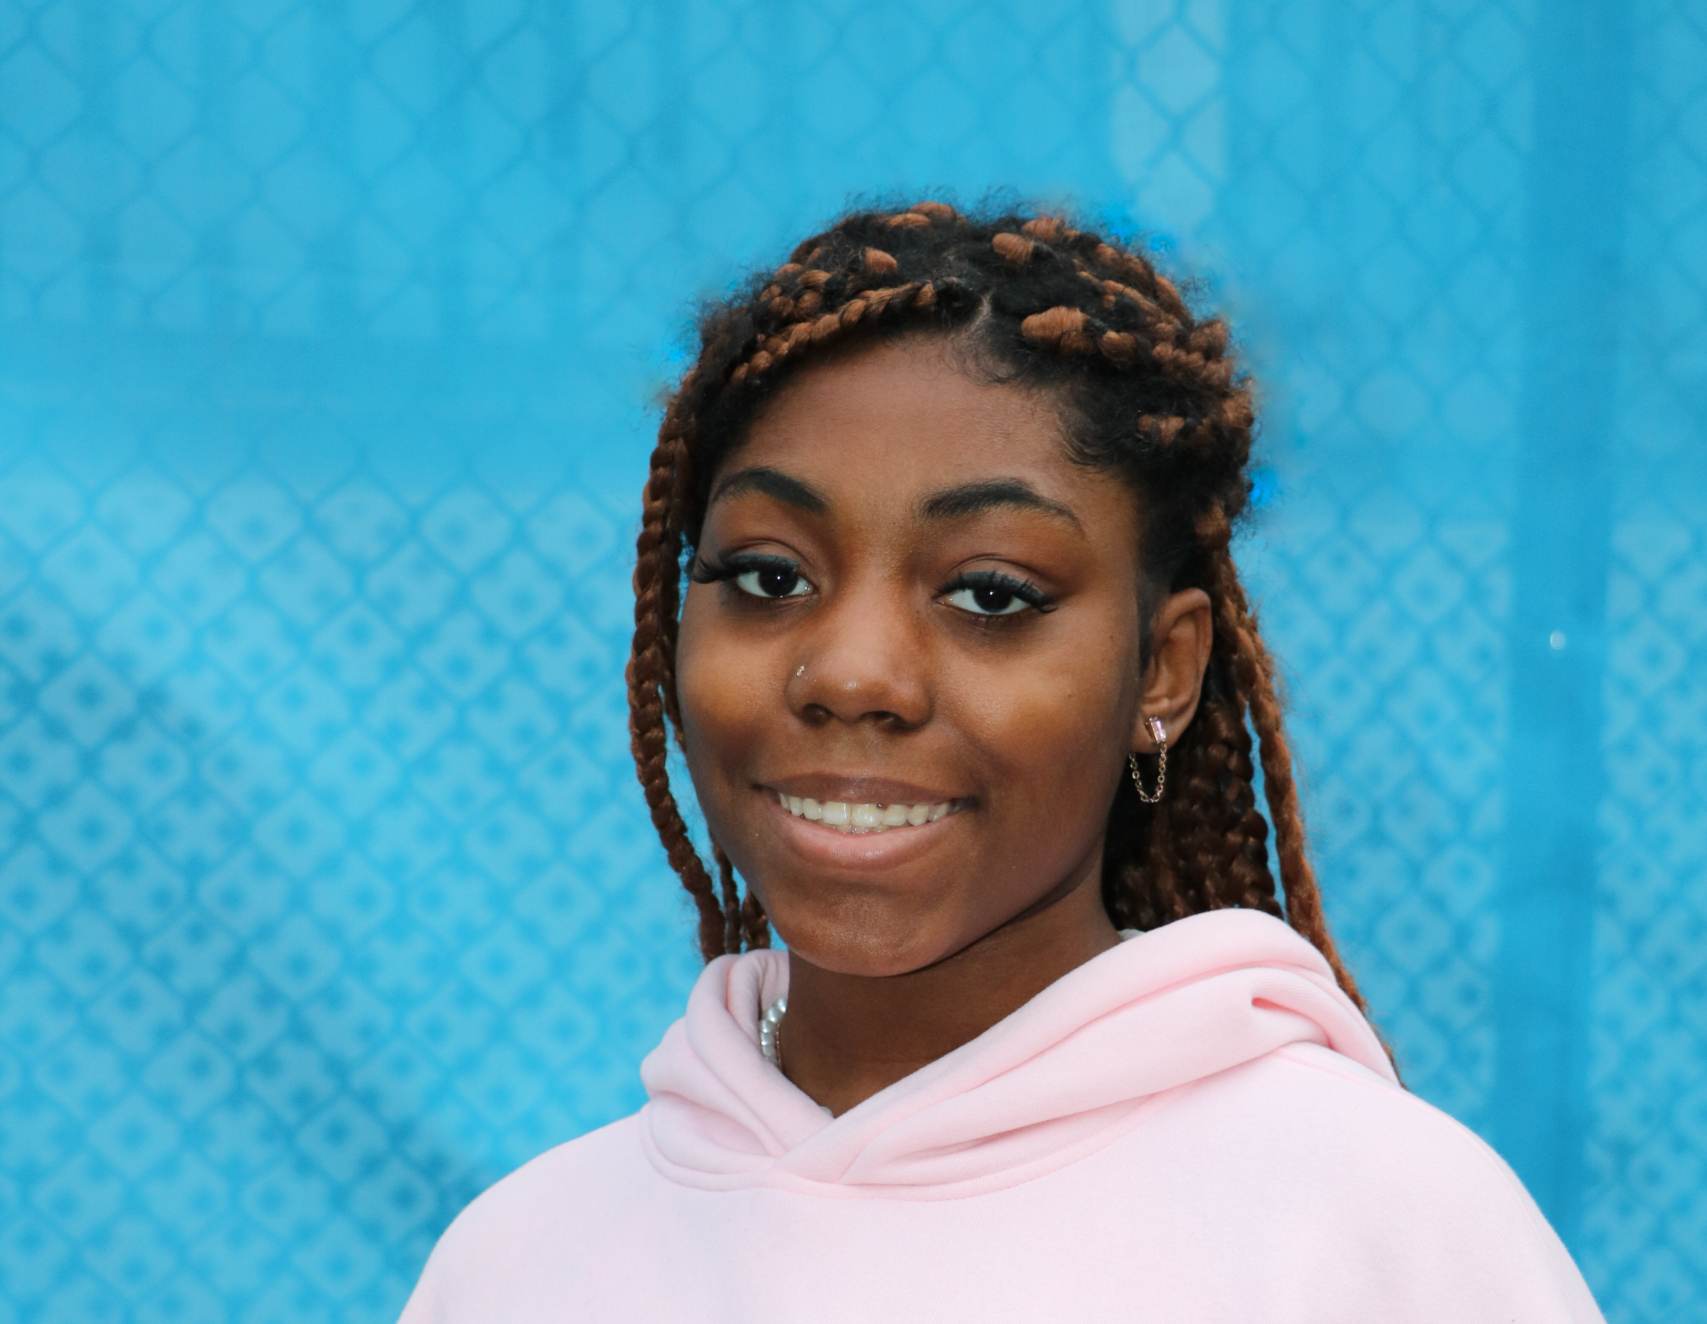 Introducing BGCB’s 2023 Youth of the Year: Brielle